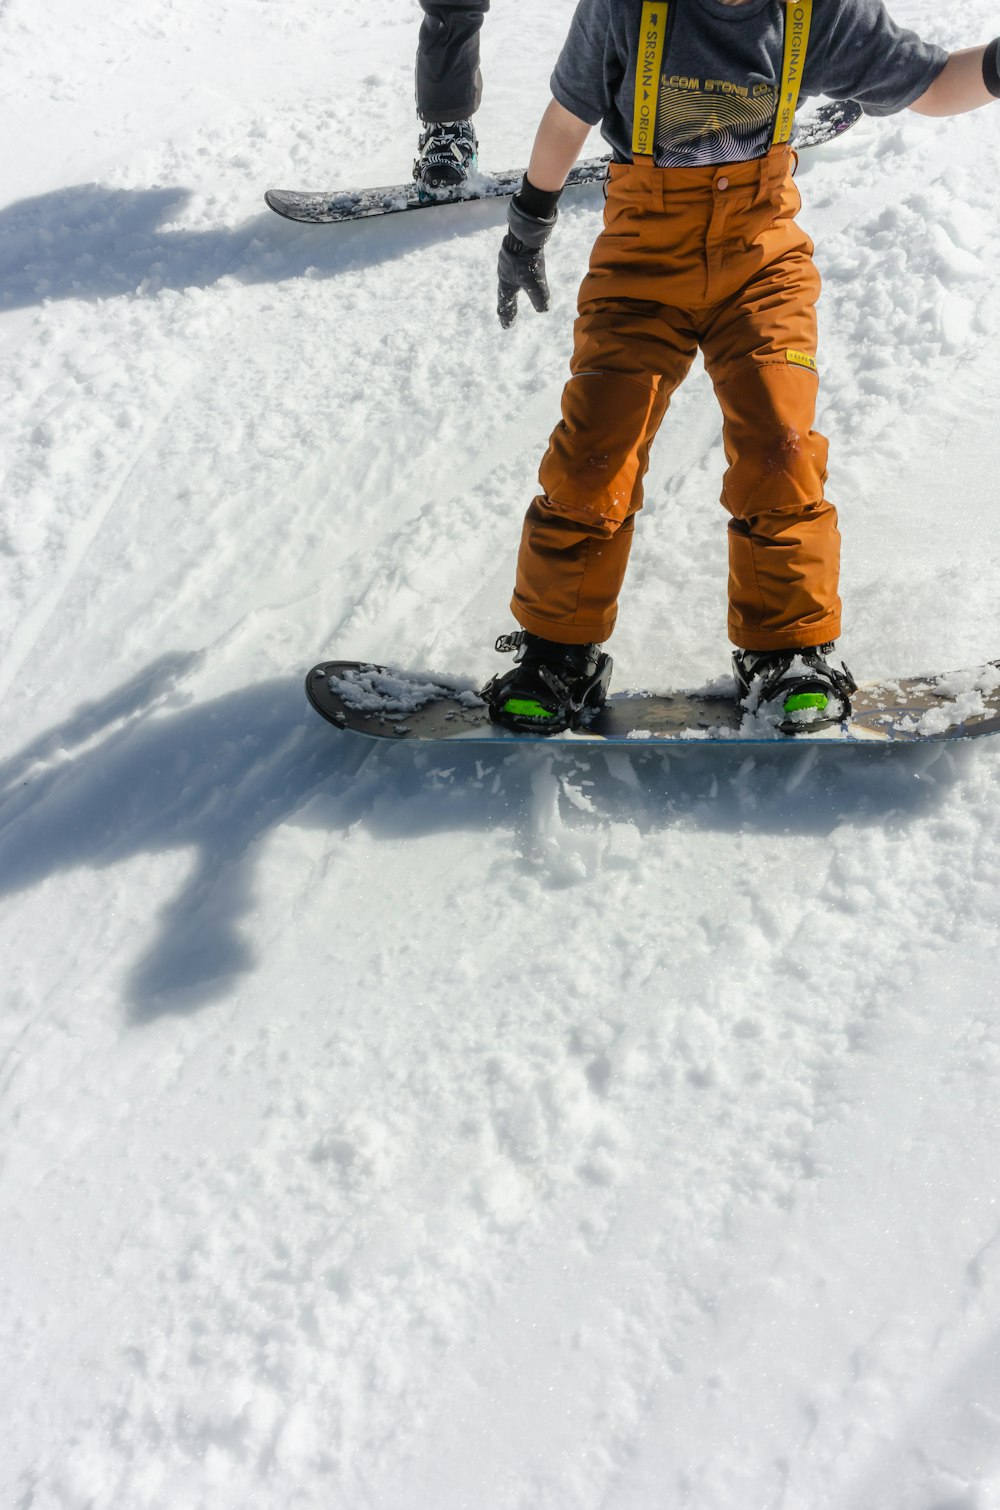 a young boy riding a snowboard down a snow covered slope